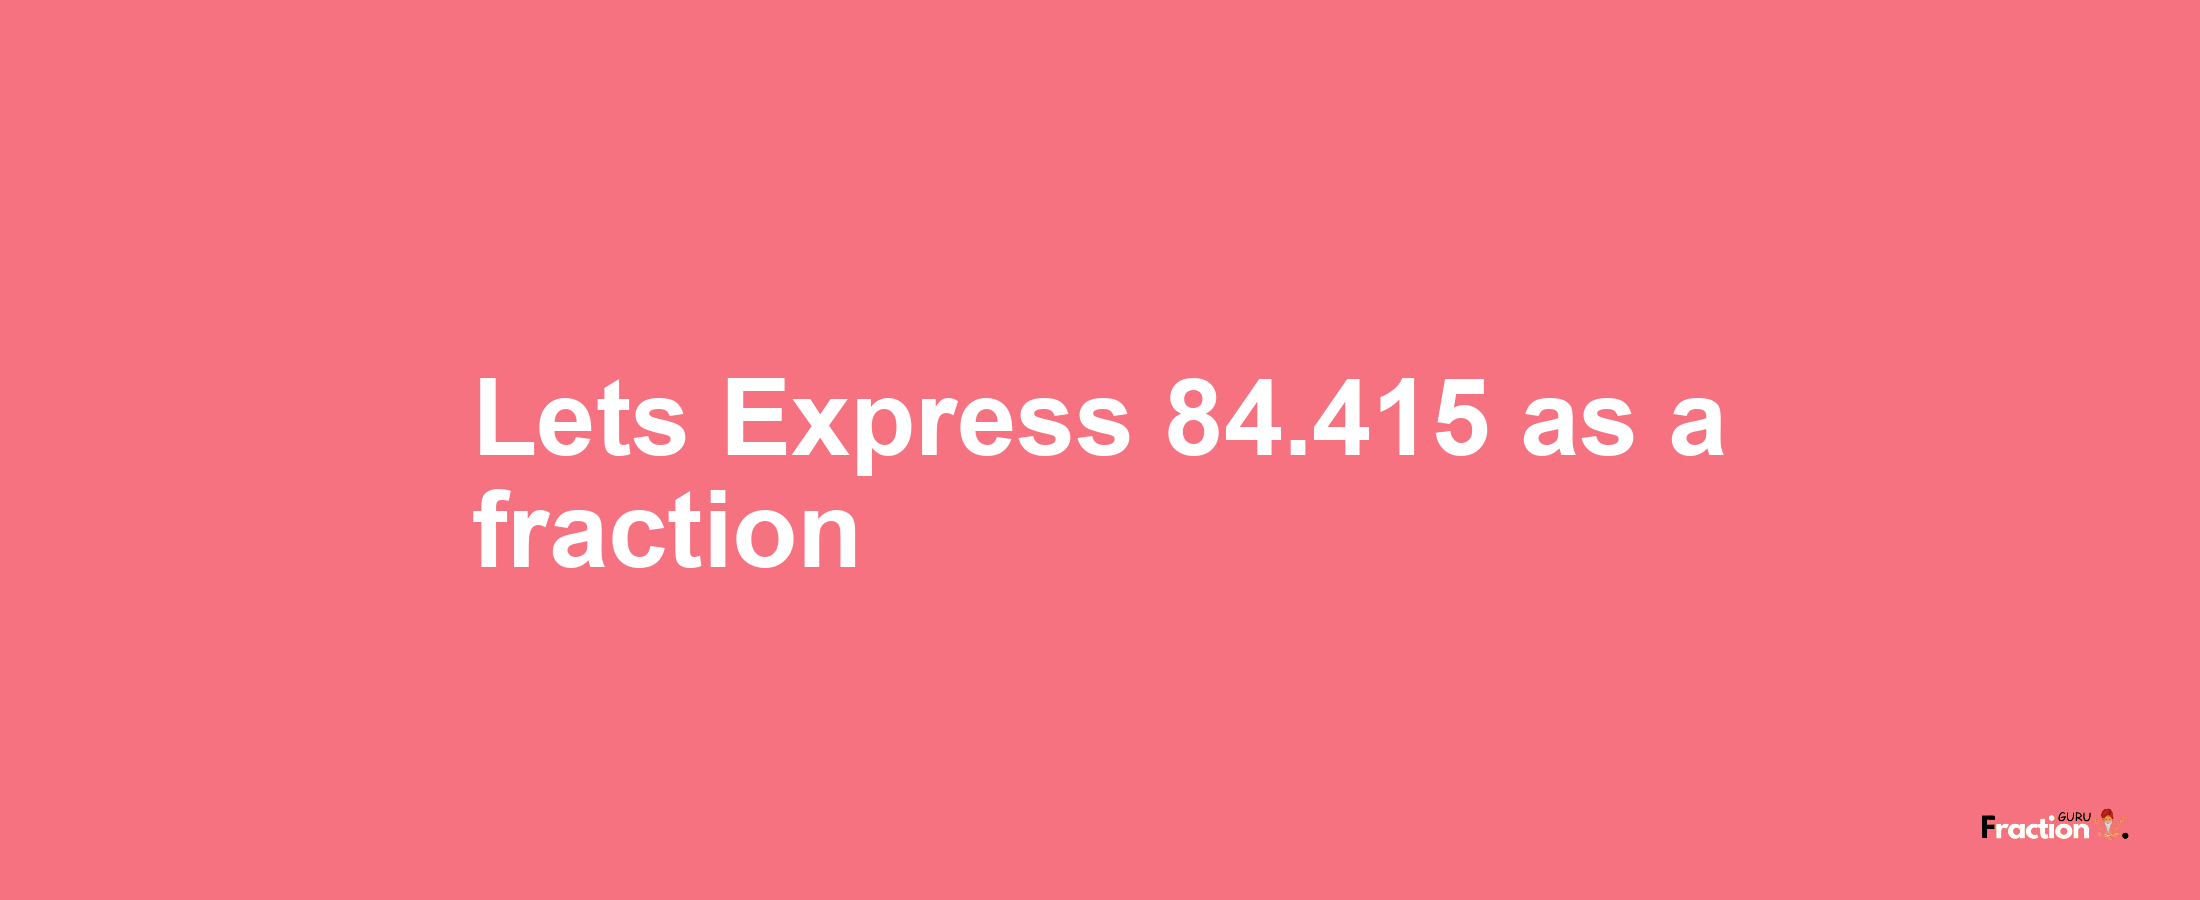 Lets Express 84.415 as afraction